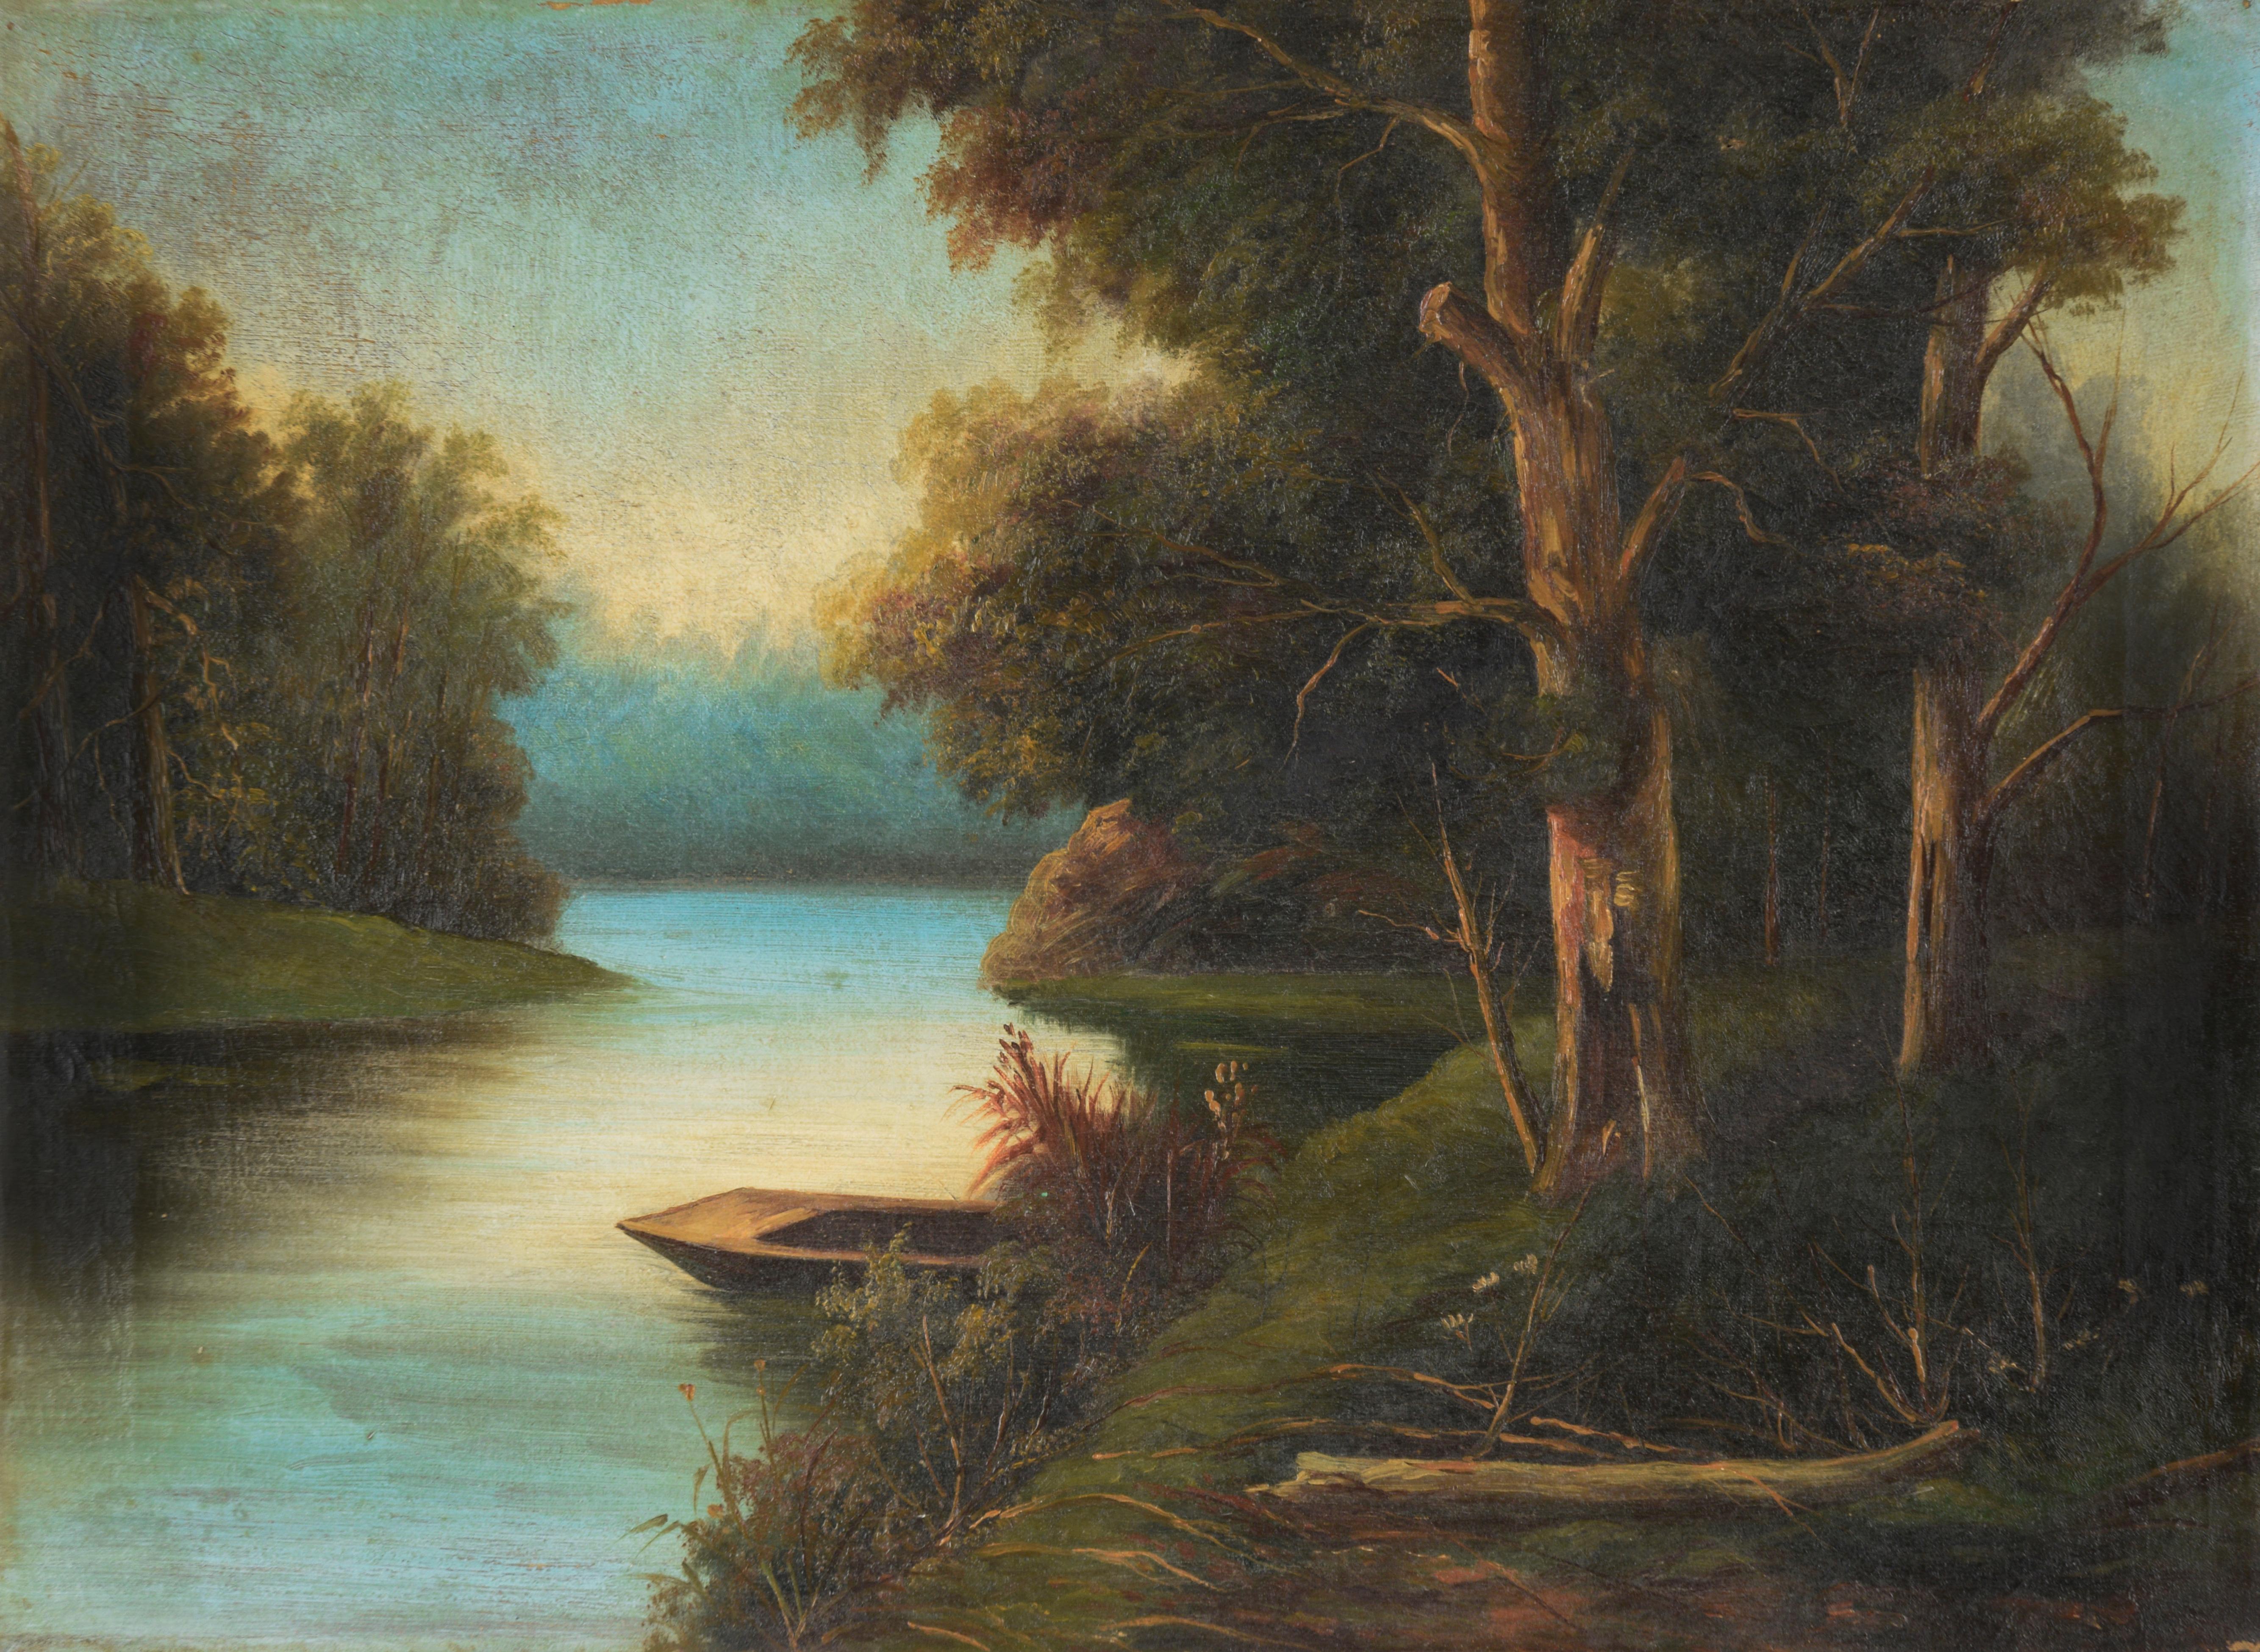 Unknown Landscape Painting - Boat on The Hudson River, Style of Robert Seldon Duncanson - Oil on Canvas